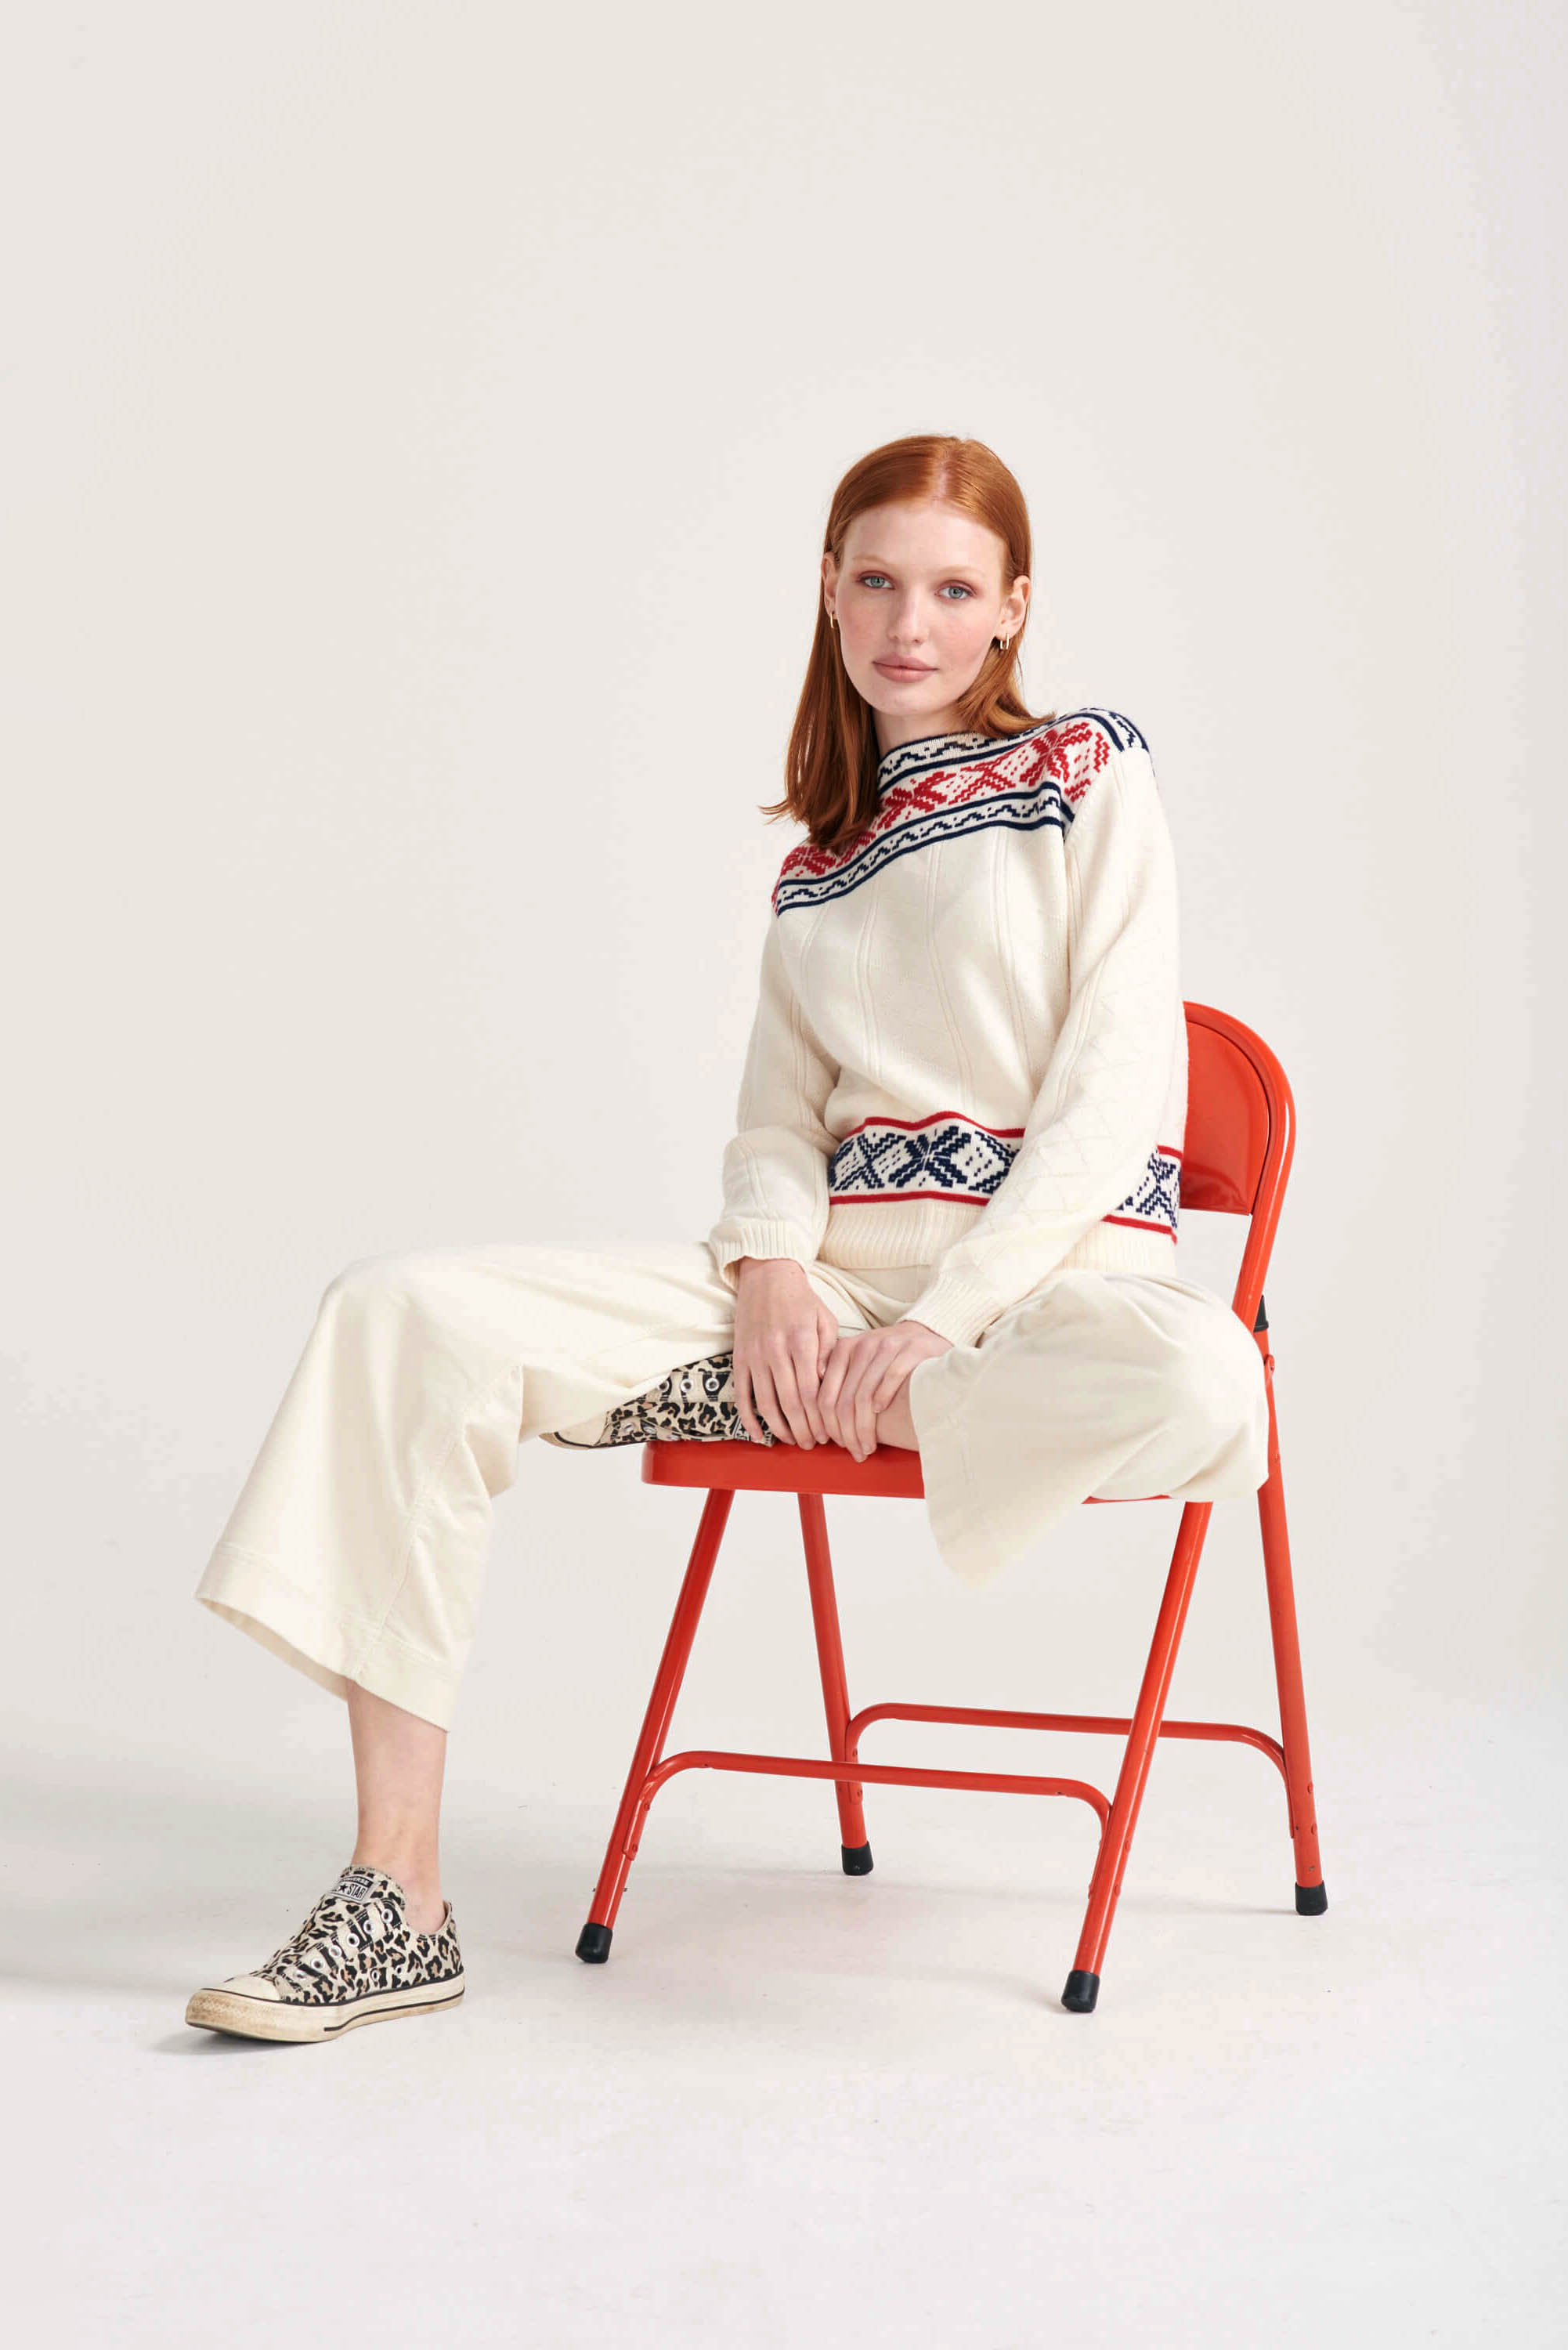 Ginger female model sat wearing Jumper1234 cream cashmere "greek guernsey" with navy and red hem and yolk detail